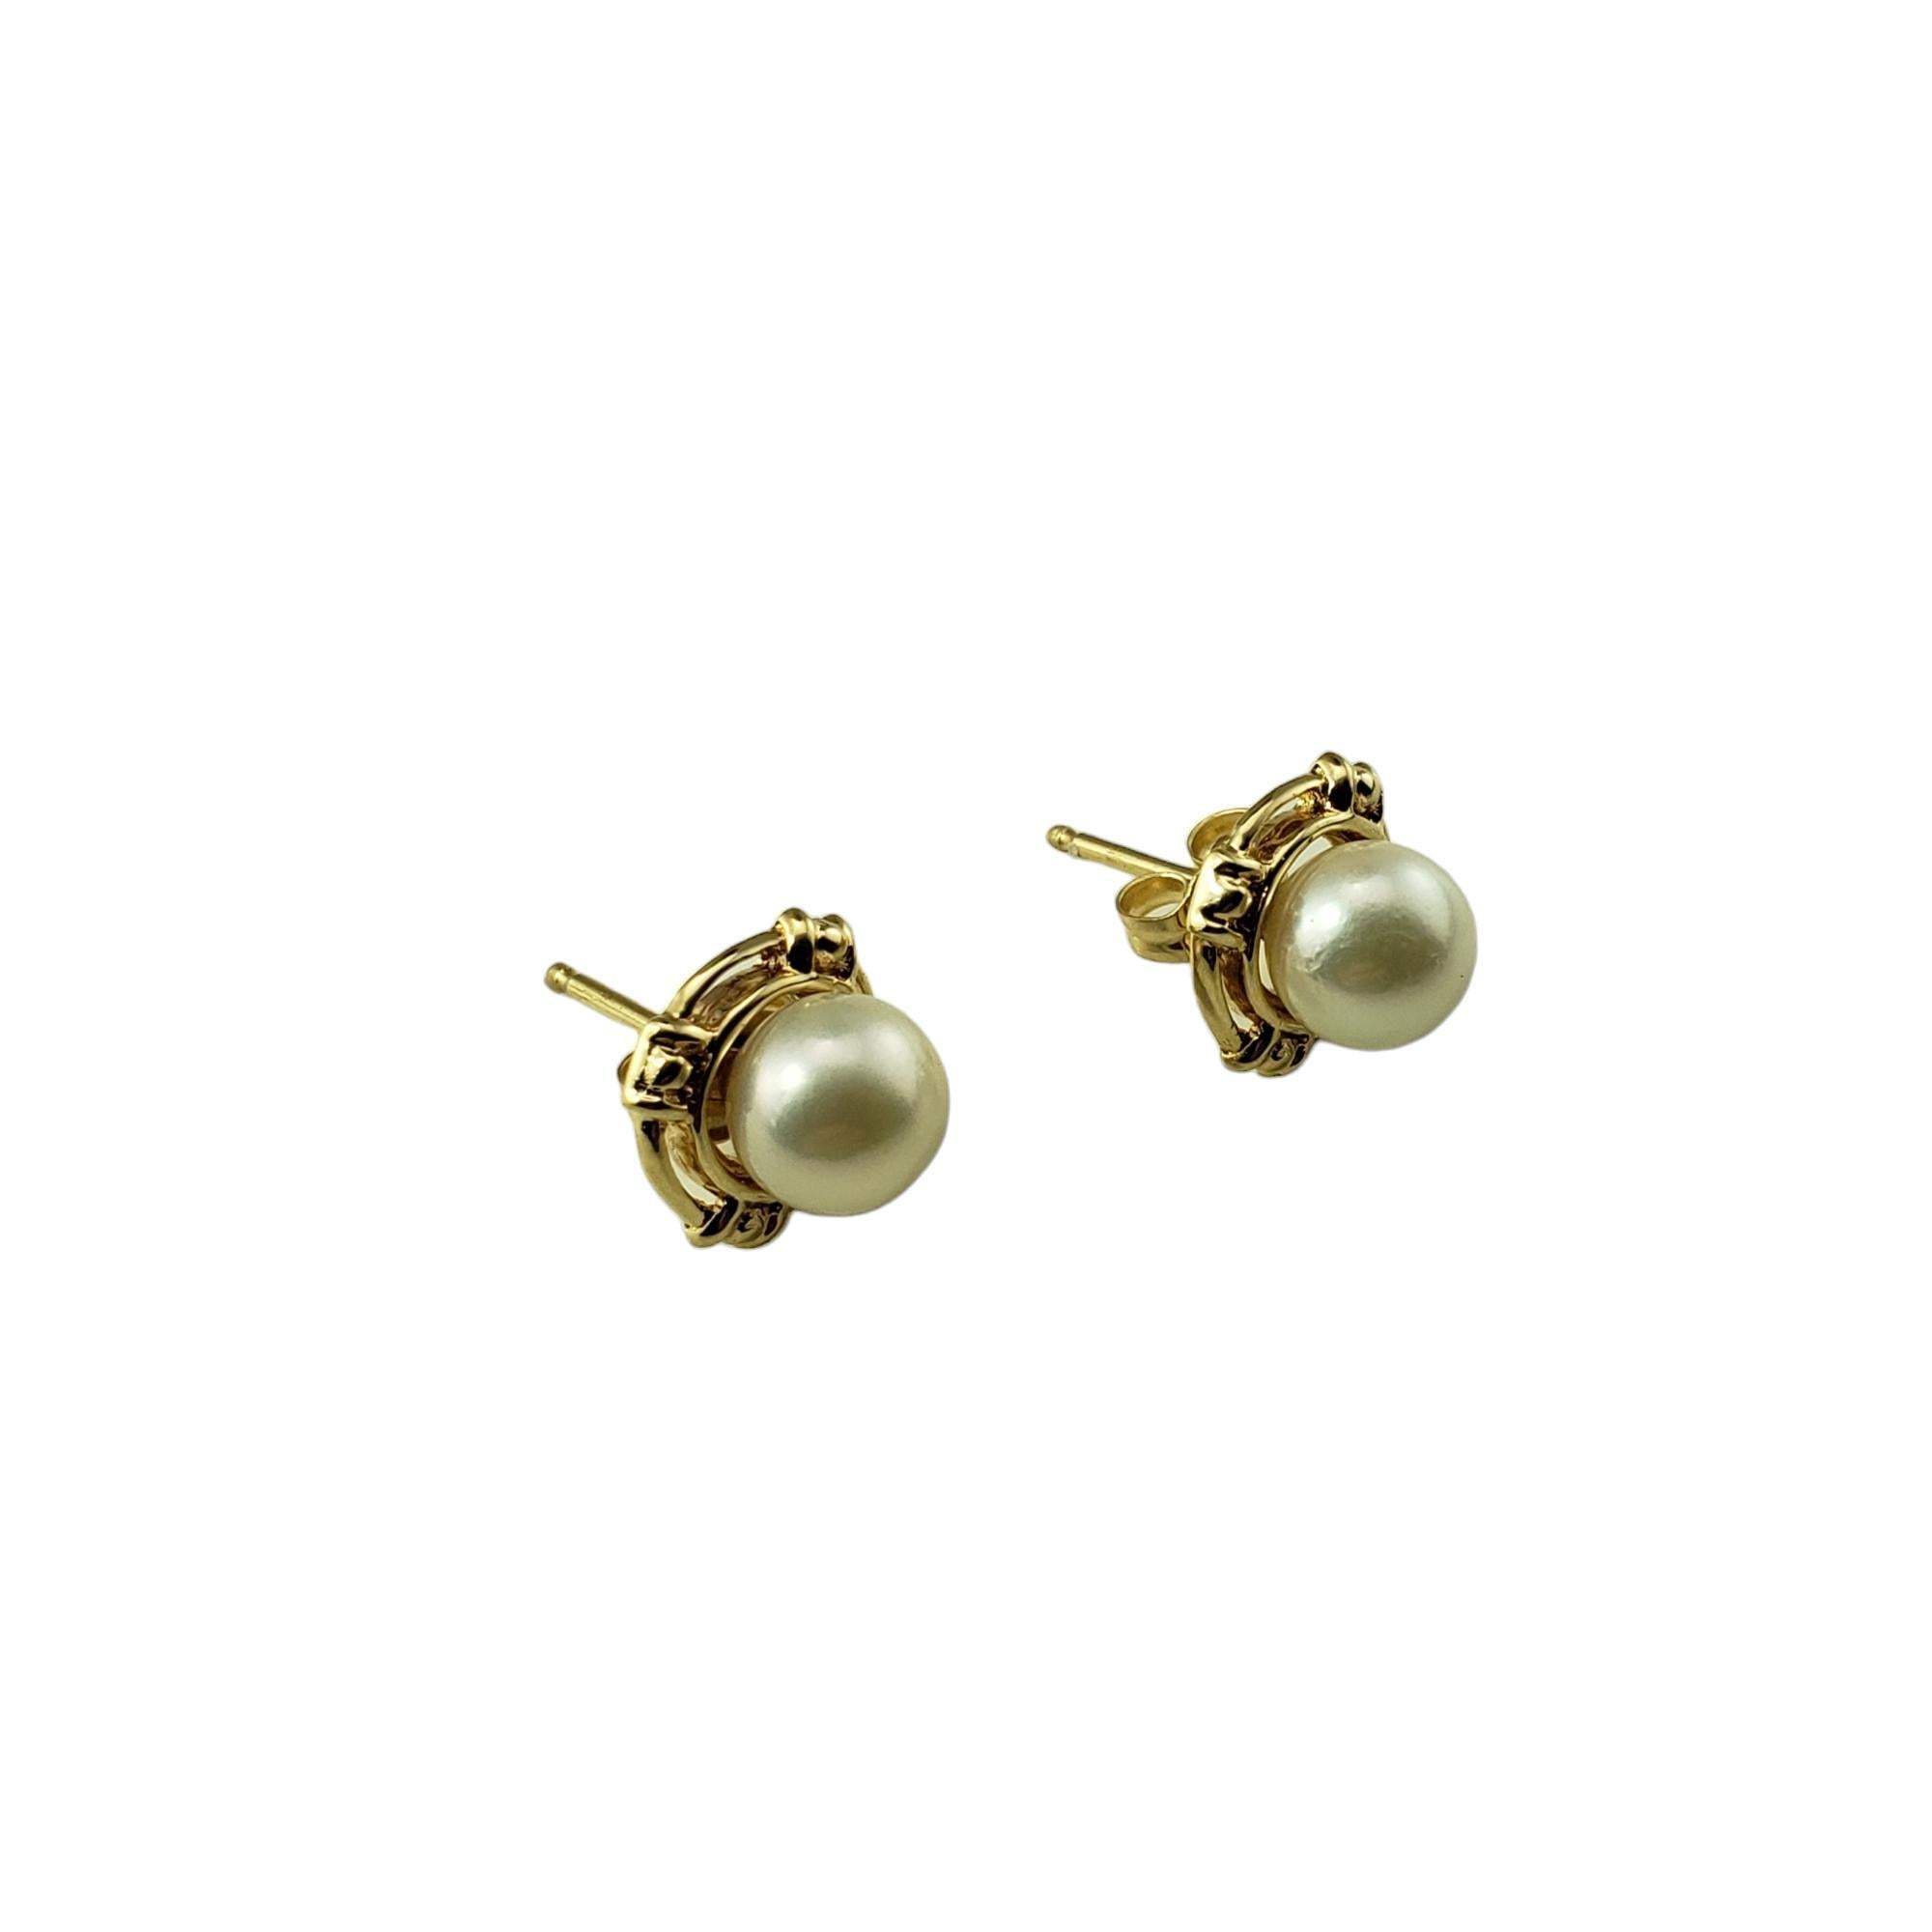 Vintage 14 Karat Yellow Gold Pearl Earrings-

These lovely earrings each features one cultured pearl (7 mm) set in classic 14K yellow gold.  Push back closures.

Size: 10 mm

Stamped: 14K

Weight: 3.2 gr./ 2.1 dwt.

Very good condition,